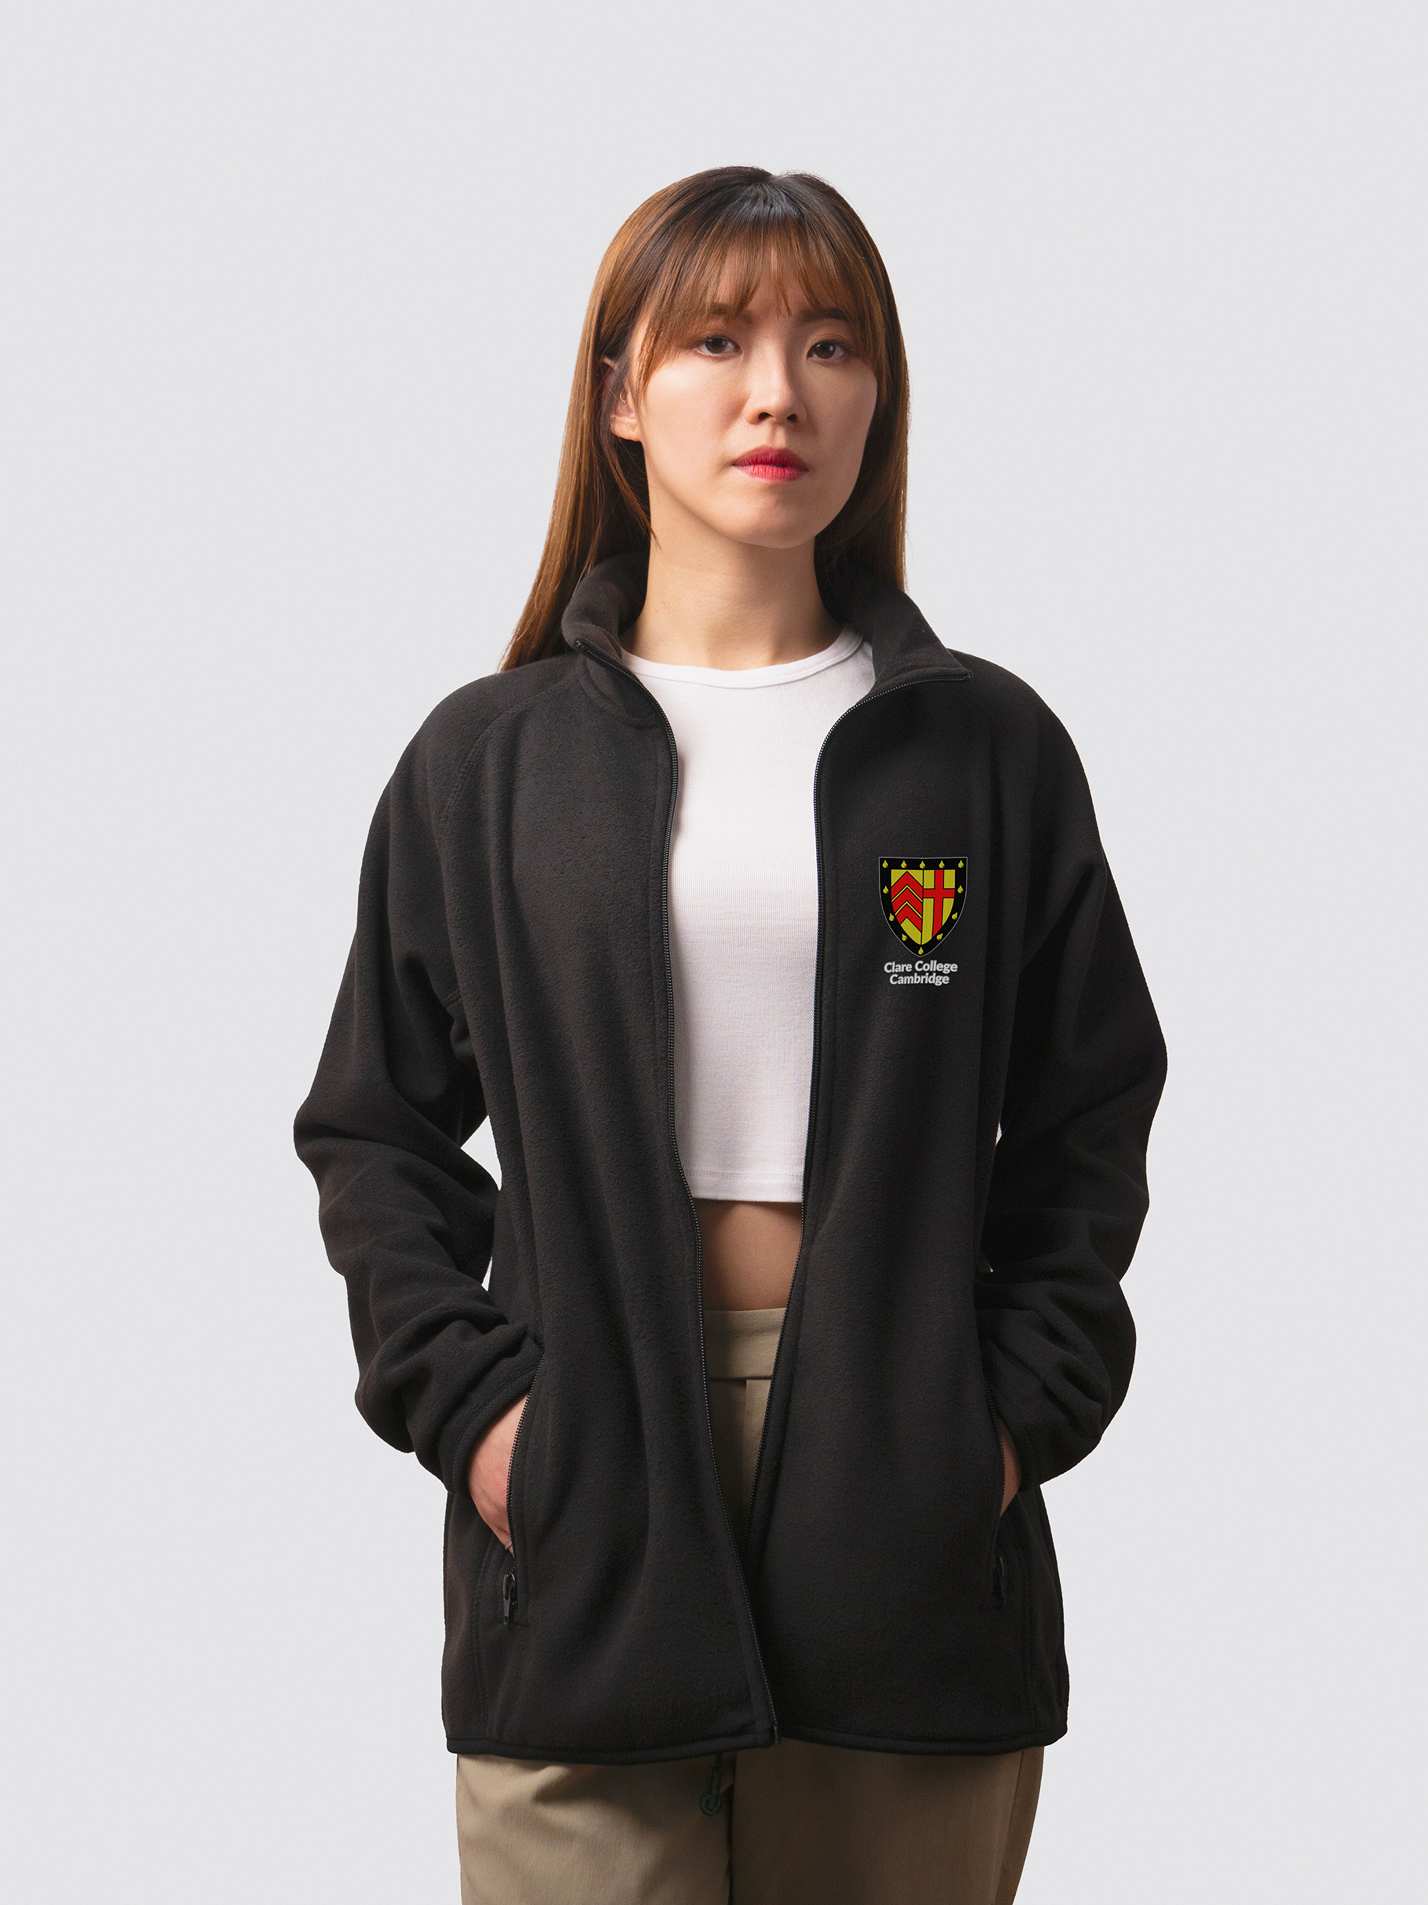 Custom student fleece, with Clare crest on the left chest